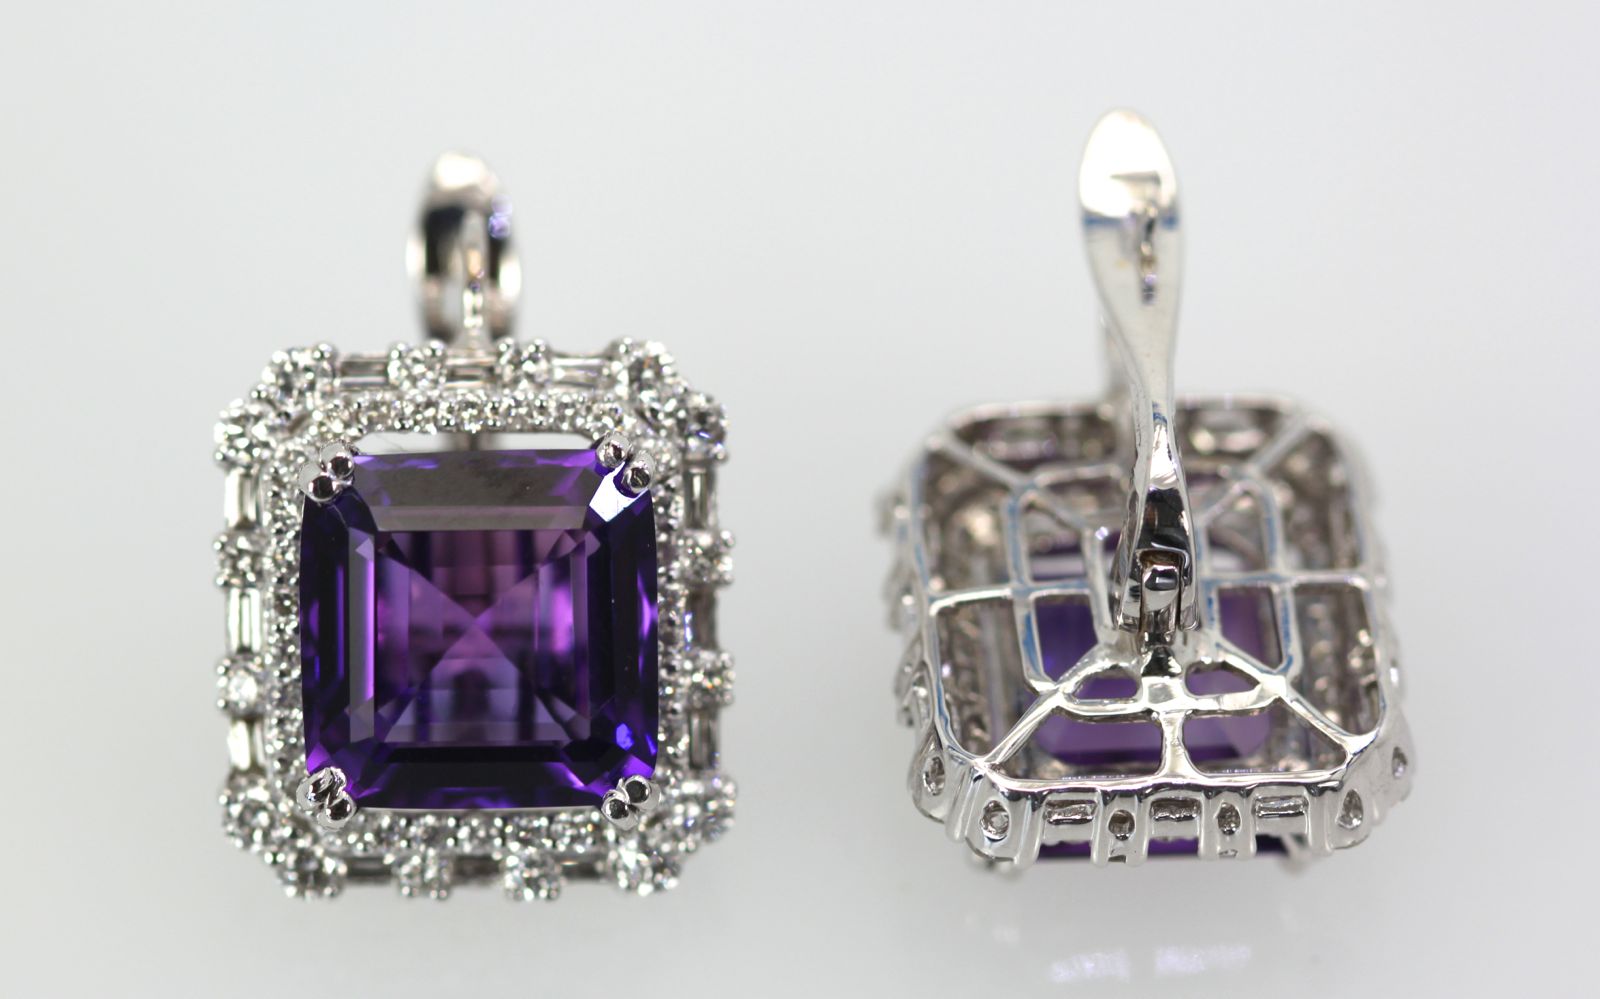 ADeep Purple Amethyst & Diamond 10 TCW Earrings 18K White Gold front and back